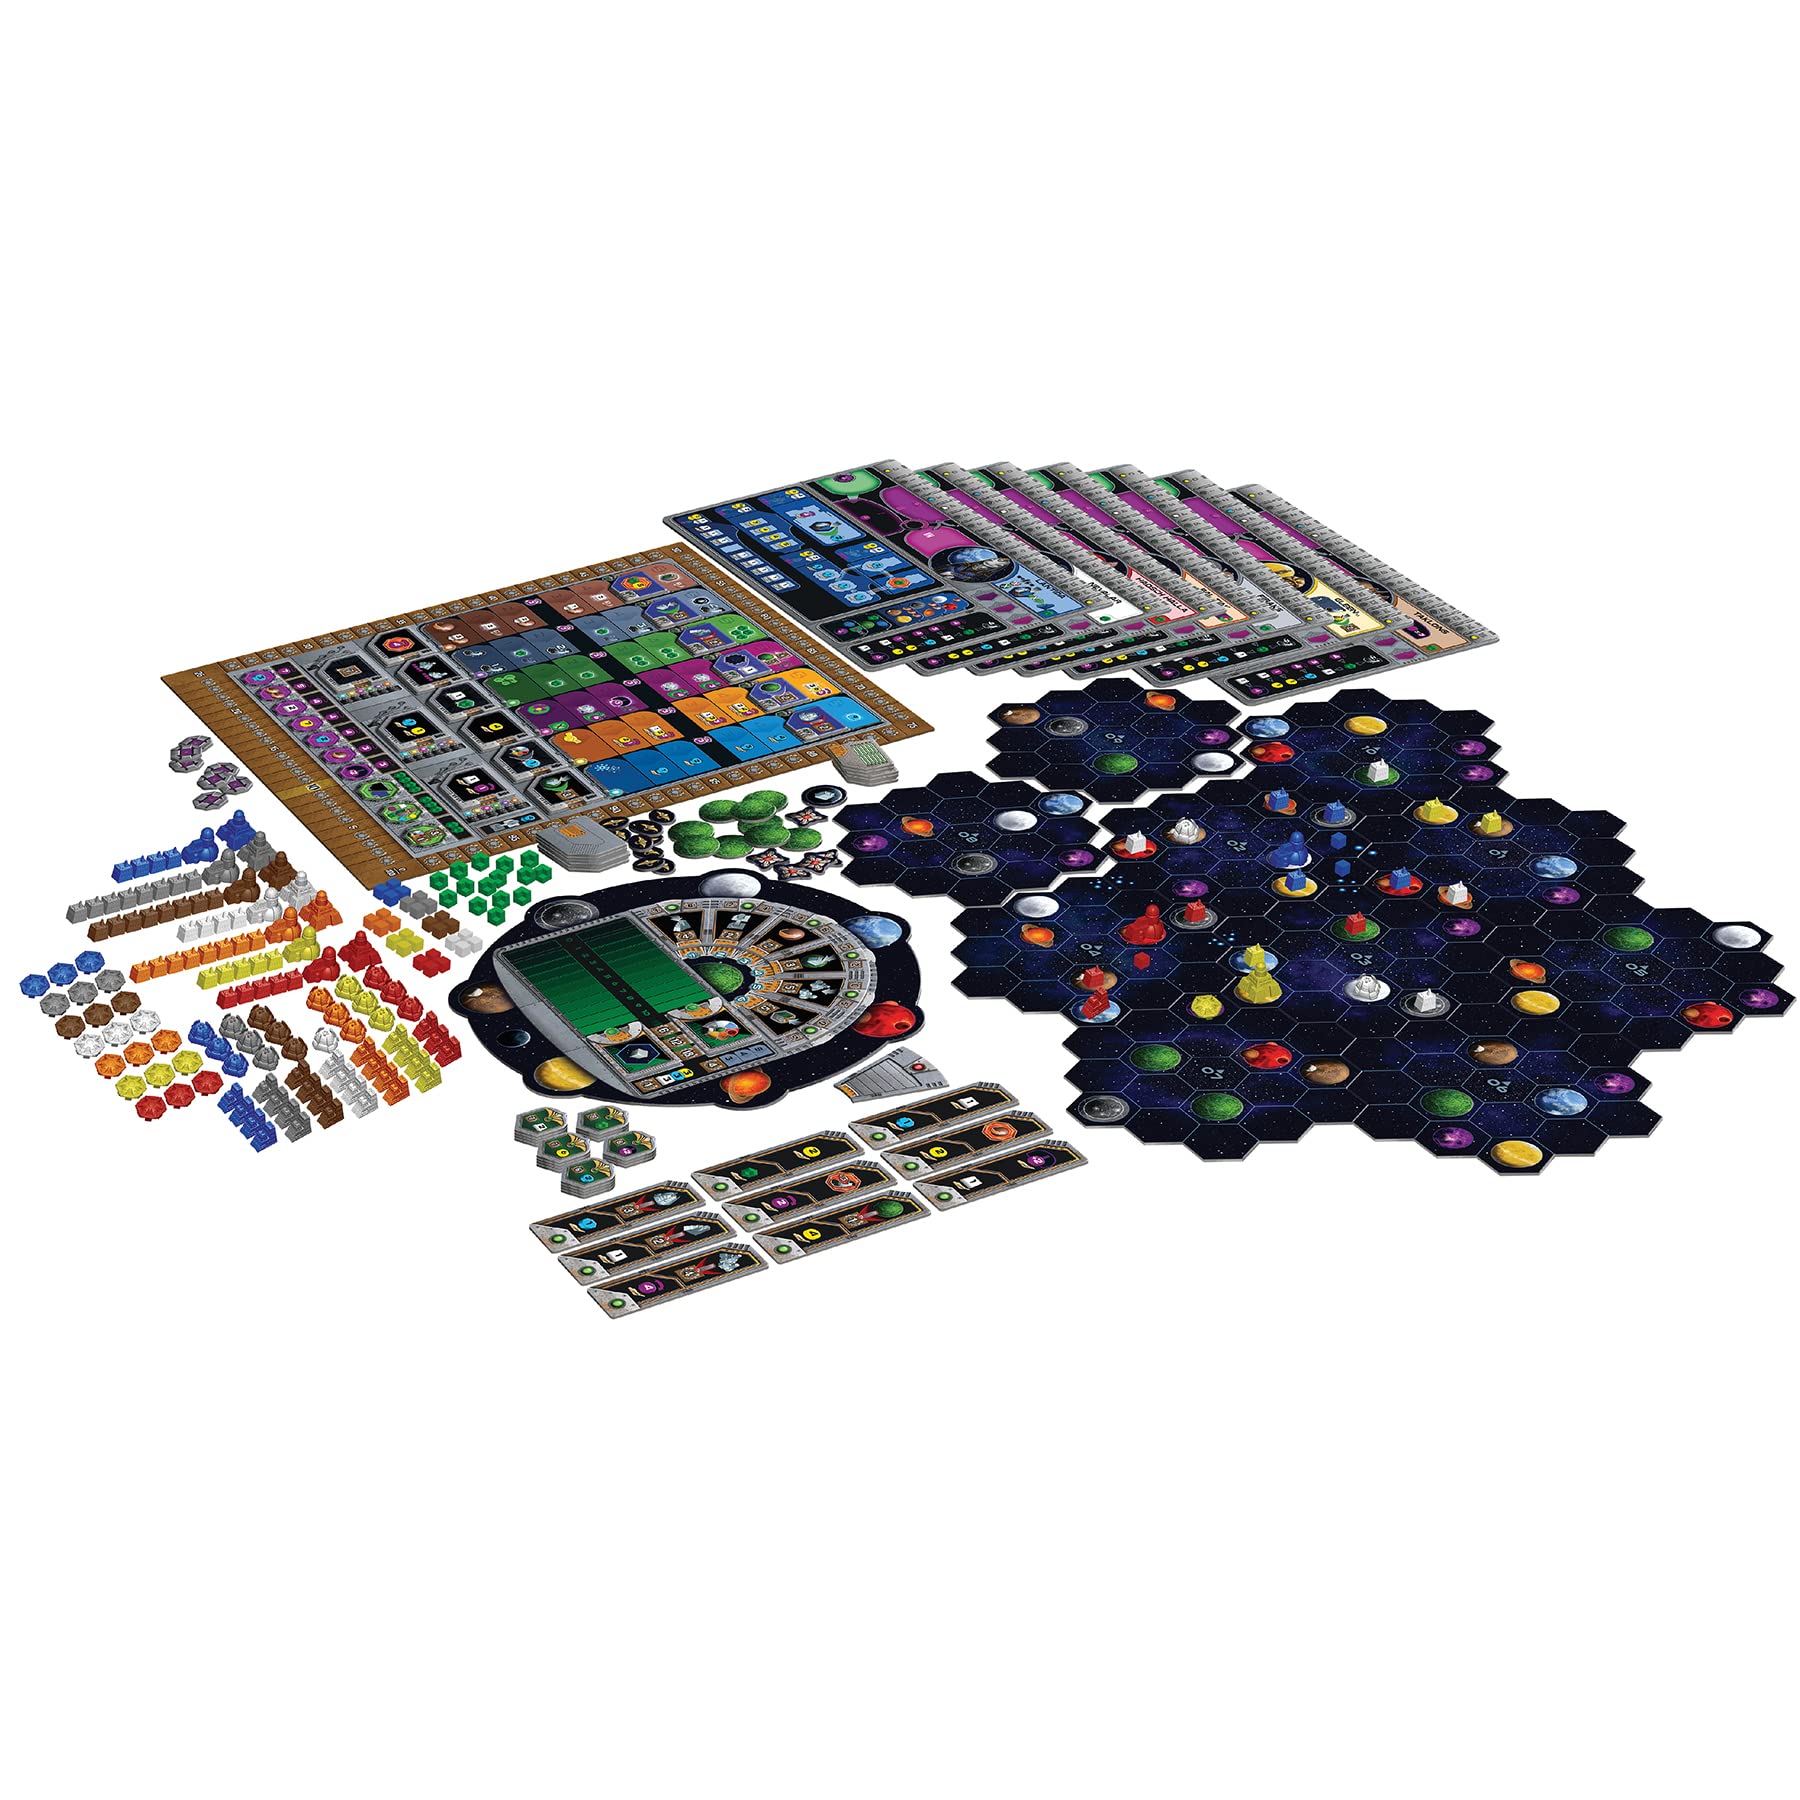 Capstone Games: Gaia Project, Strategy Board Game, A Follow Up Game From Terra Mystica, Includes a Challenging Solo Mode, 1 to 5 Players, Ages 14 and Up